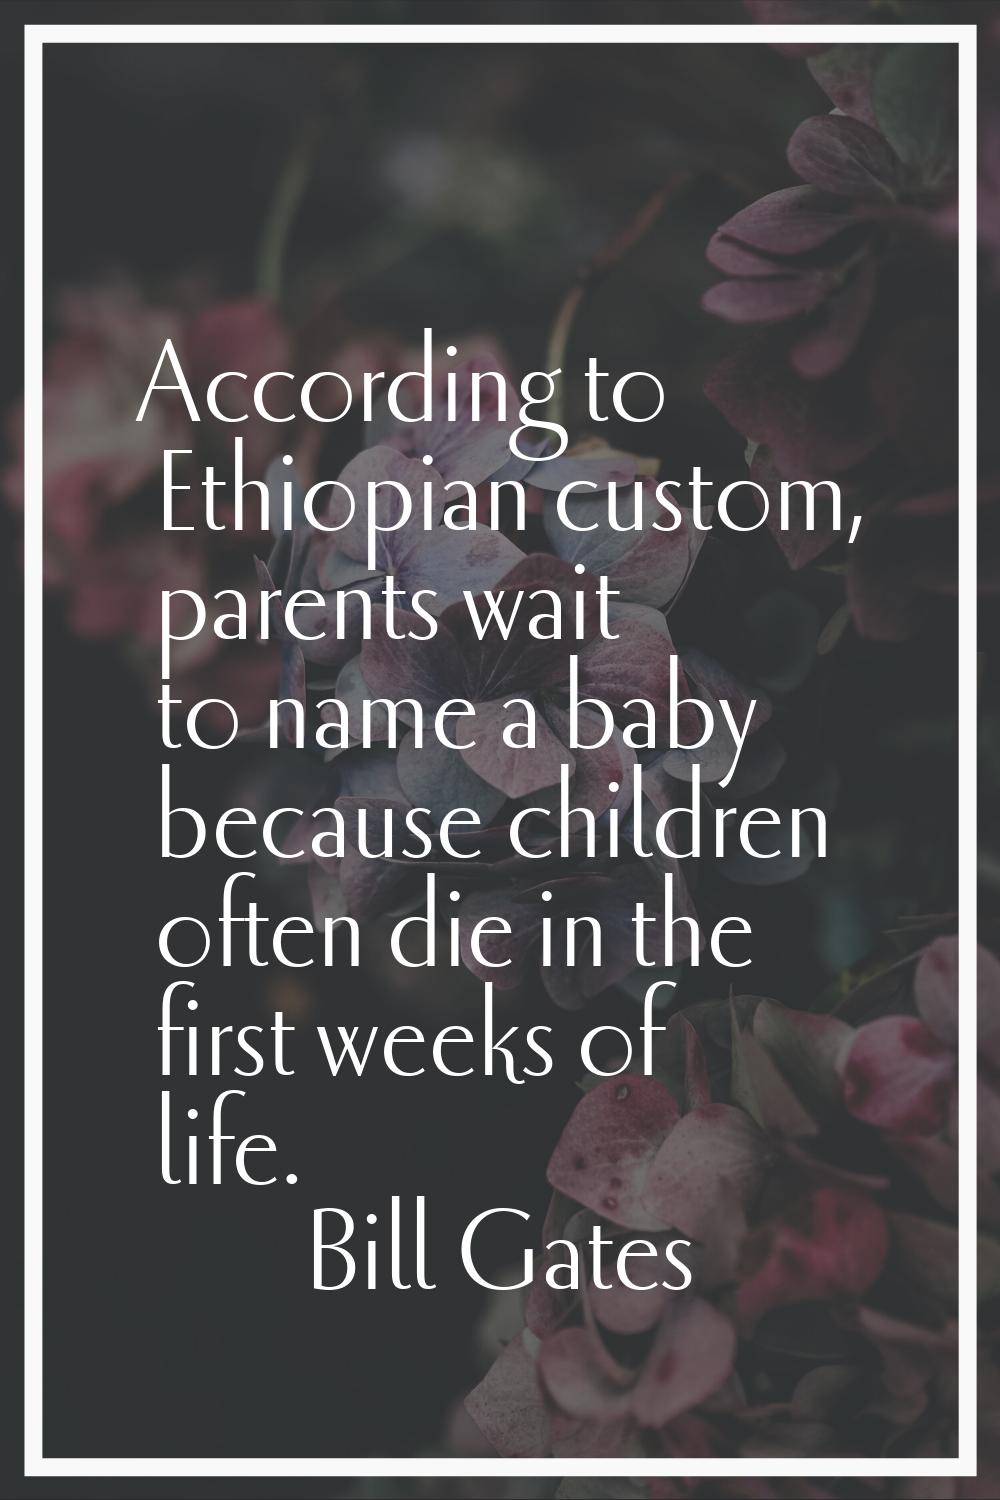 According to Ethiopian custom, parents wait to name a baby because children often die in the first 